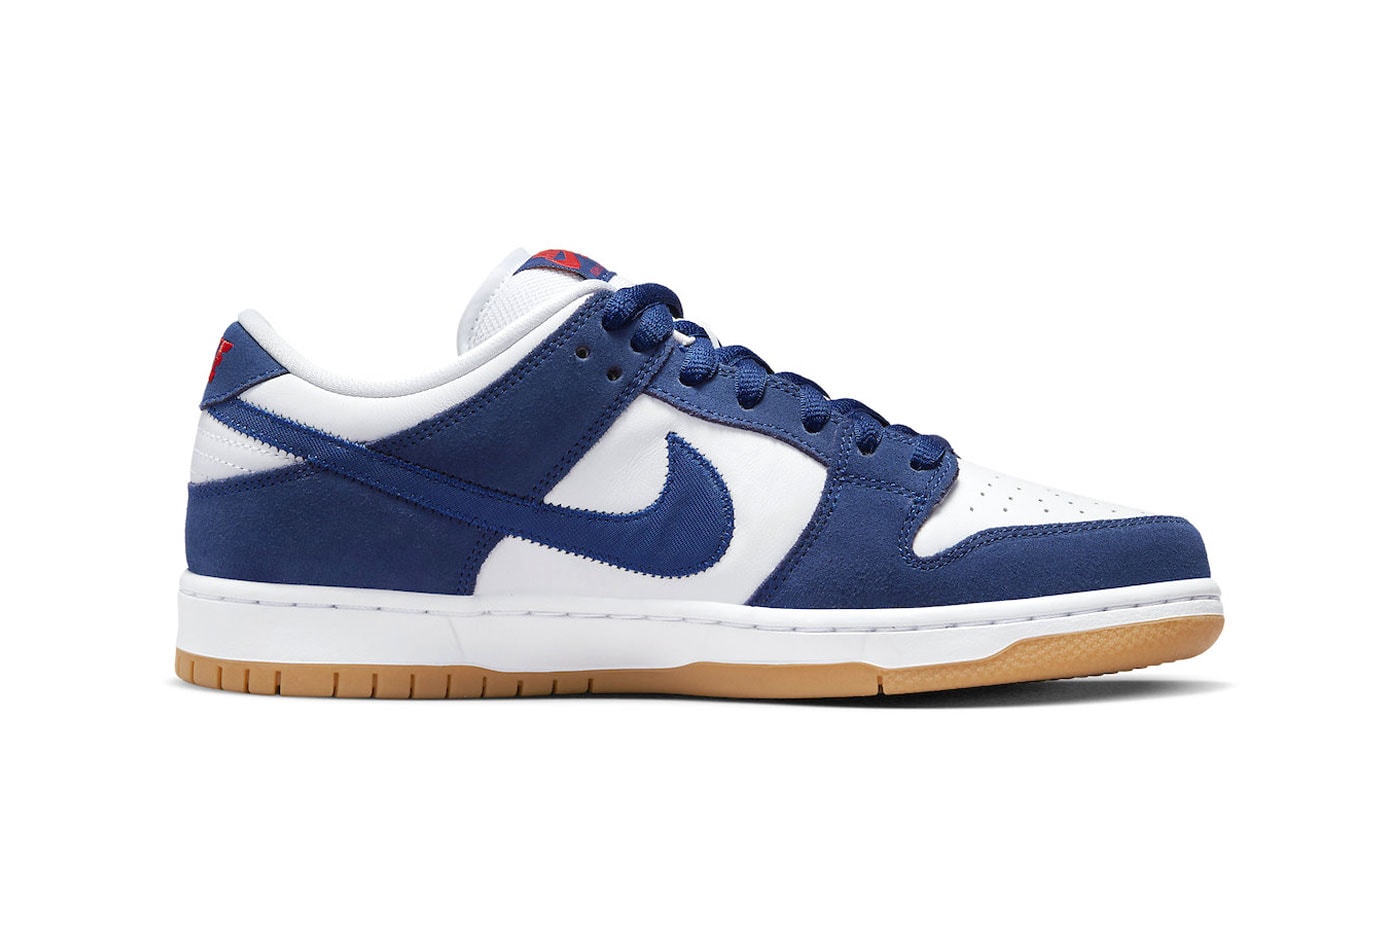 Nike SB Dunk Low Gets Hit With the "LA Dodgers" Colorway for Its Fall Release Date MLB baseball DO9395-400 release info skate shops